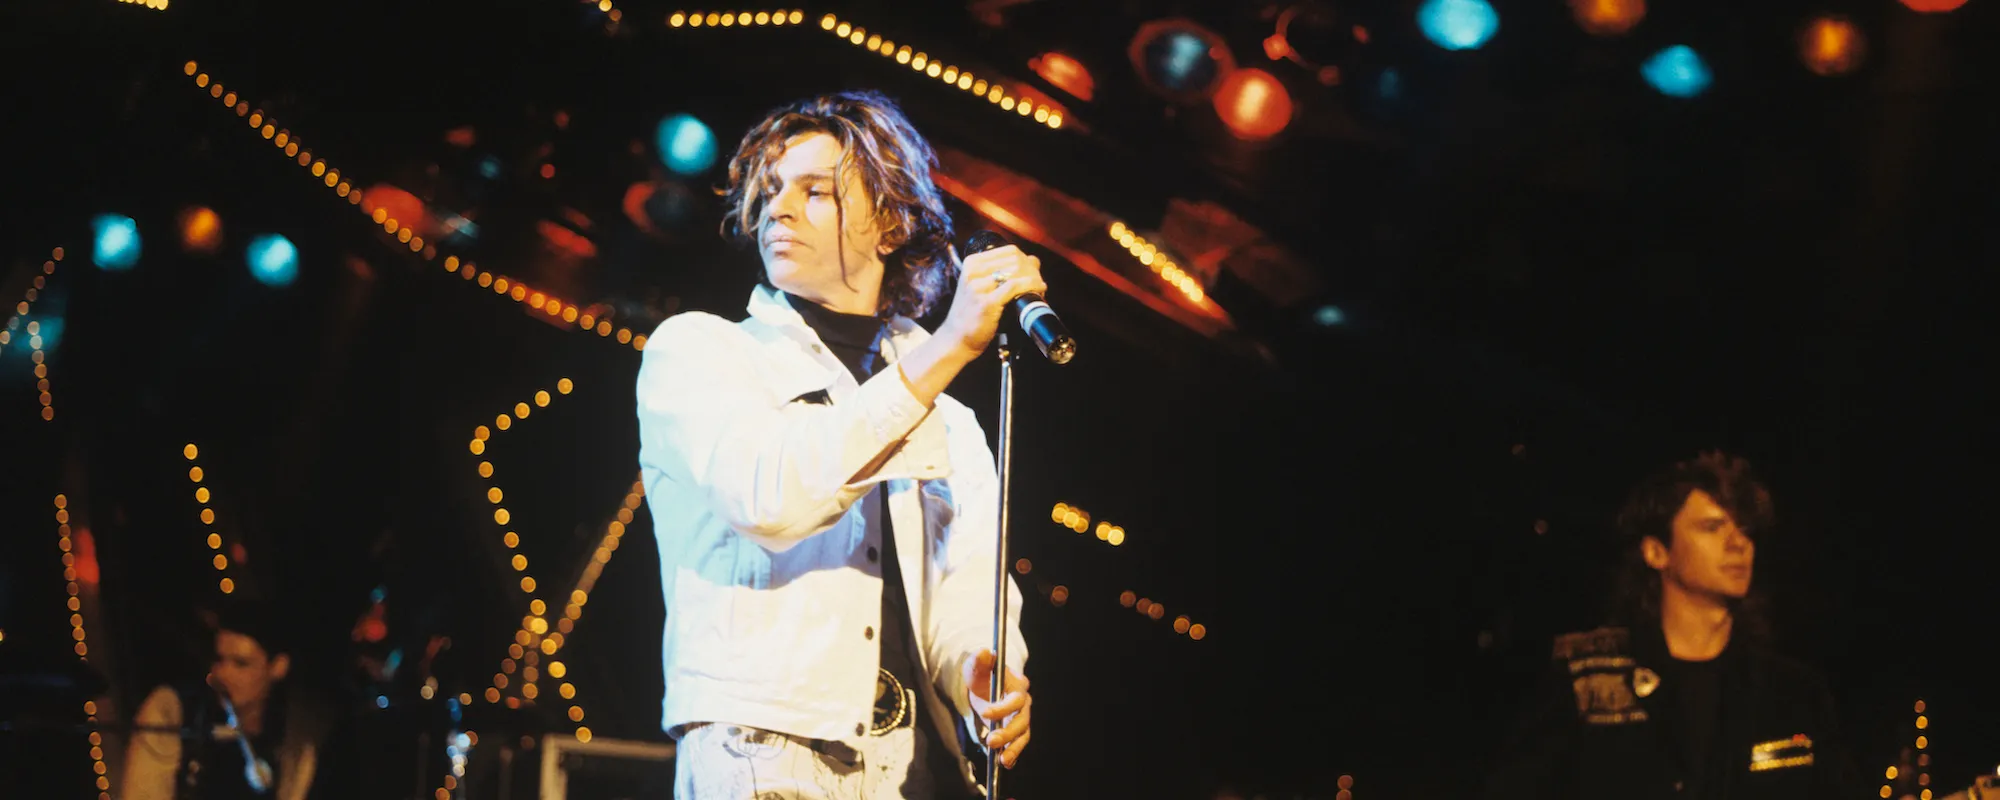 Listen: One of Two Never-Released Songs by INXS’ Michael Hutchence, “One Way”